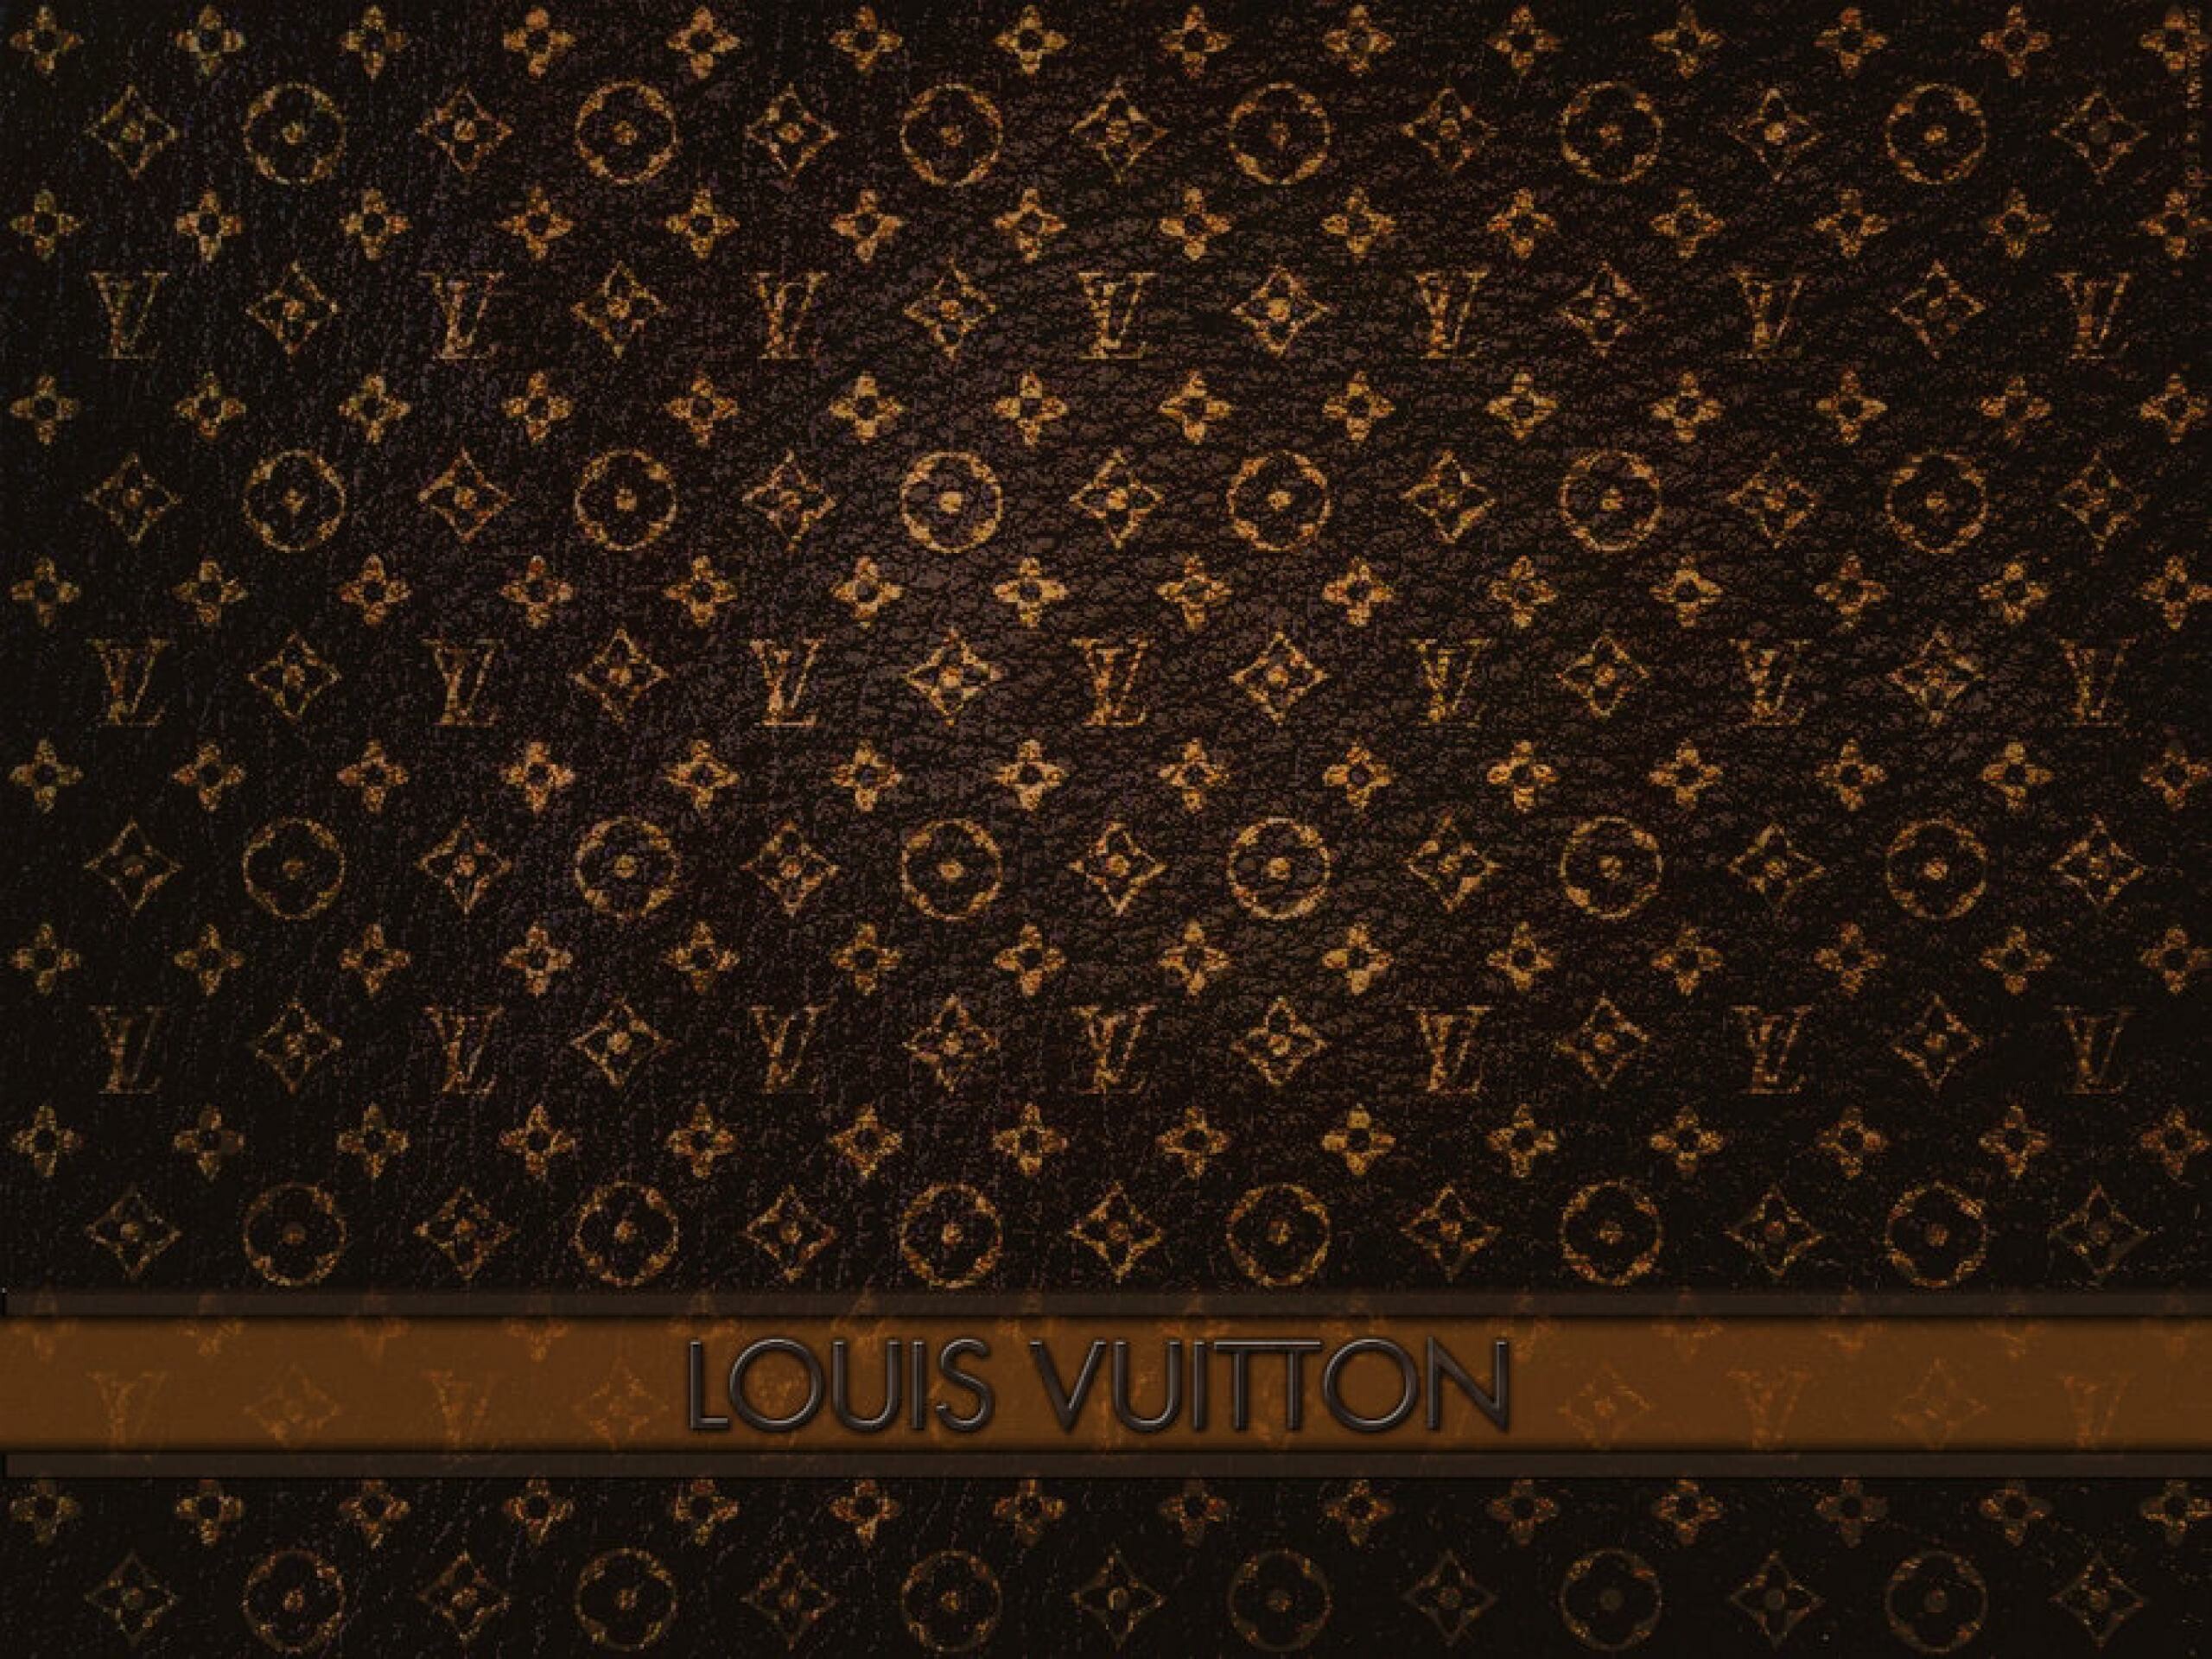 Louis Vuitton: The brand is synonymous with luxury and style. 2560x1920 HD Wallpaper.